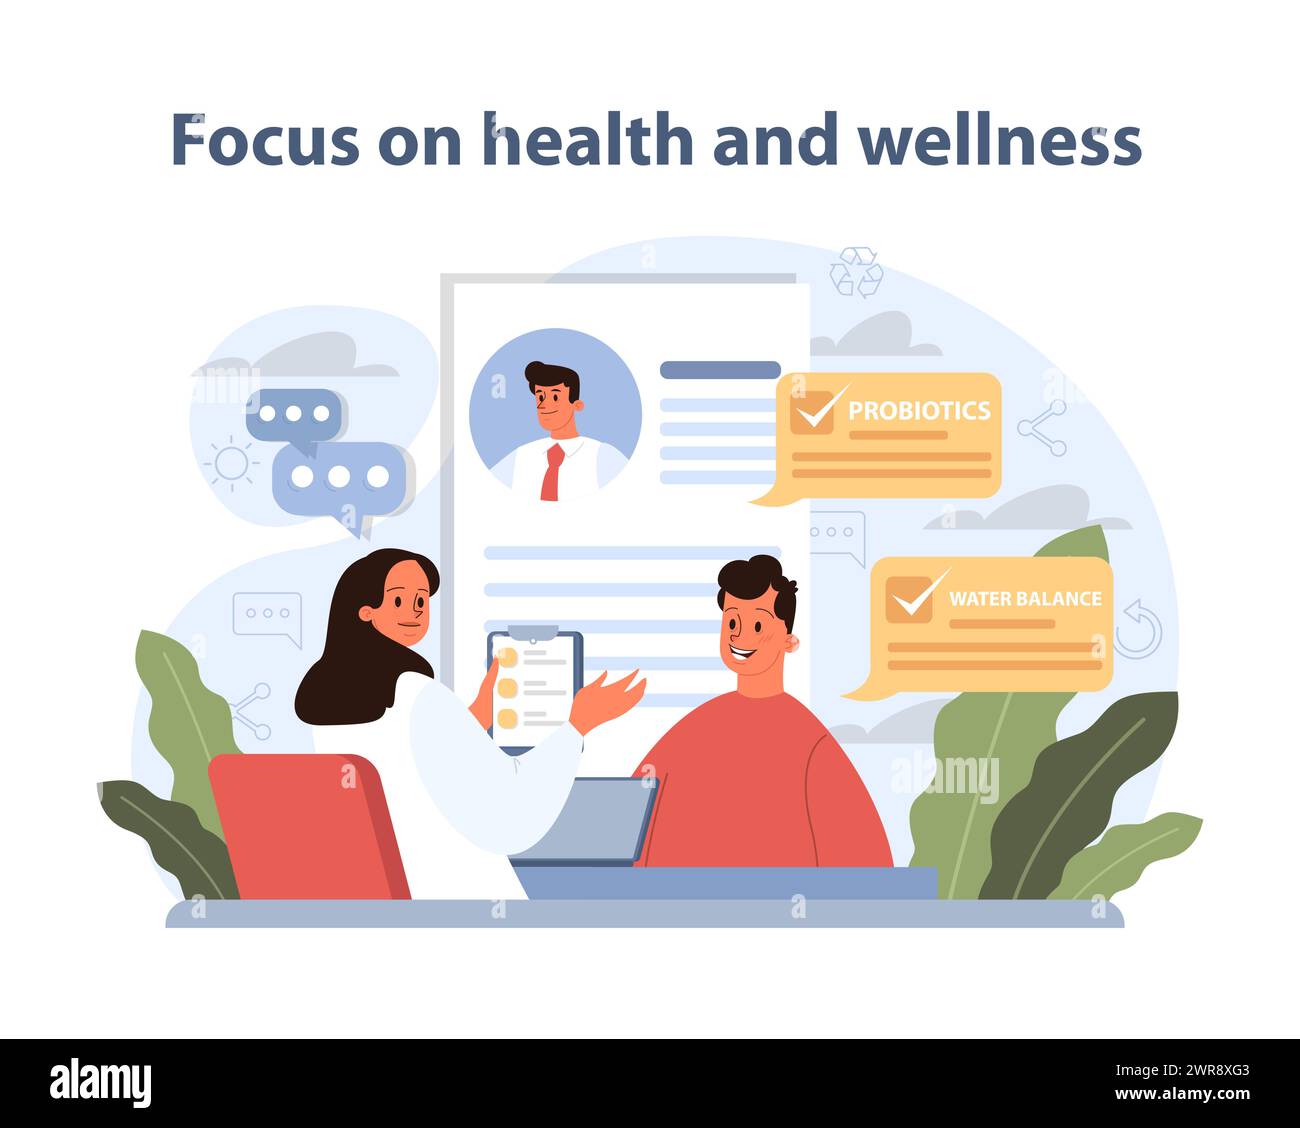 Health and Wellness Focus. A consultation on wellness, featuring probiotics and hydration, showcases a proactive approach to personal health. Stock Vector